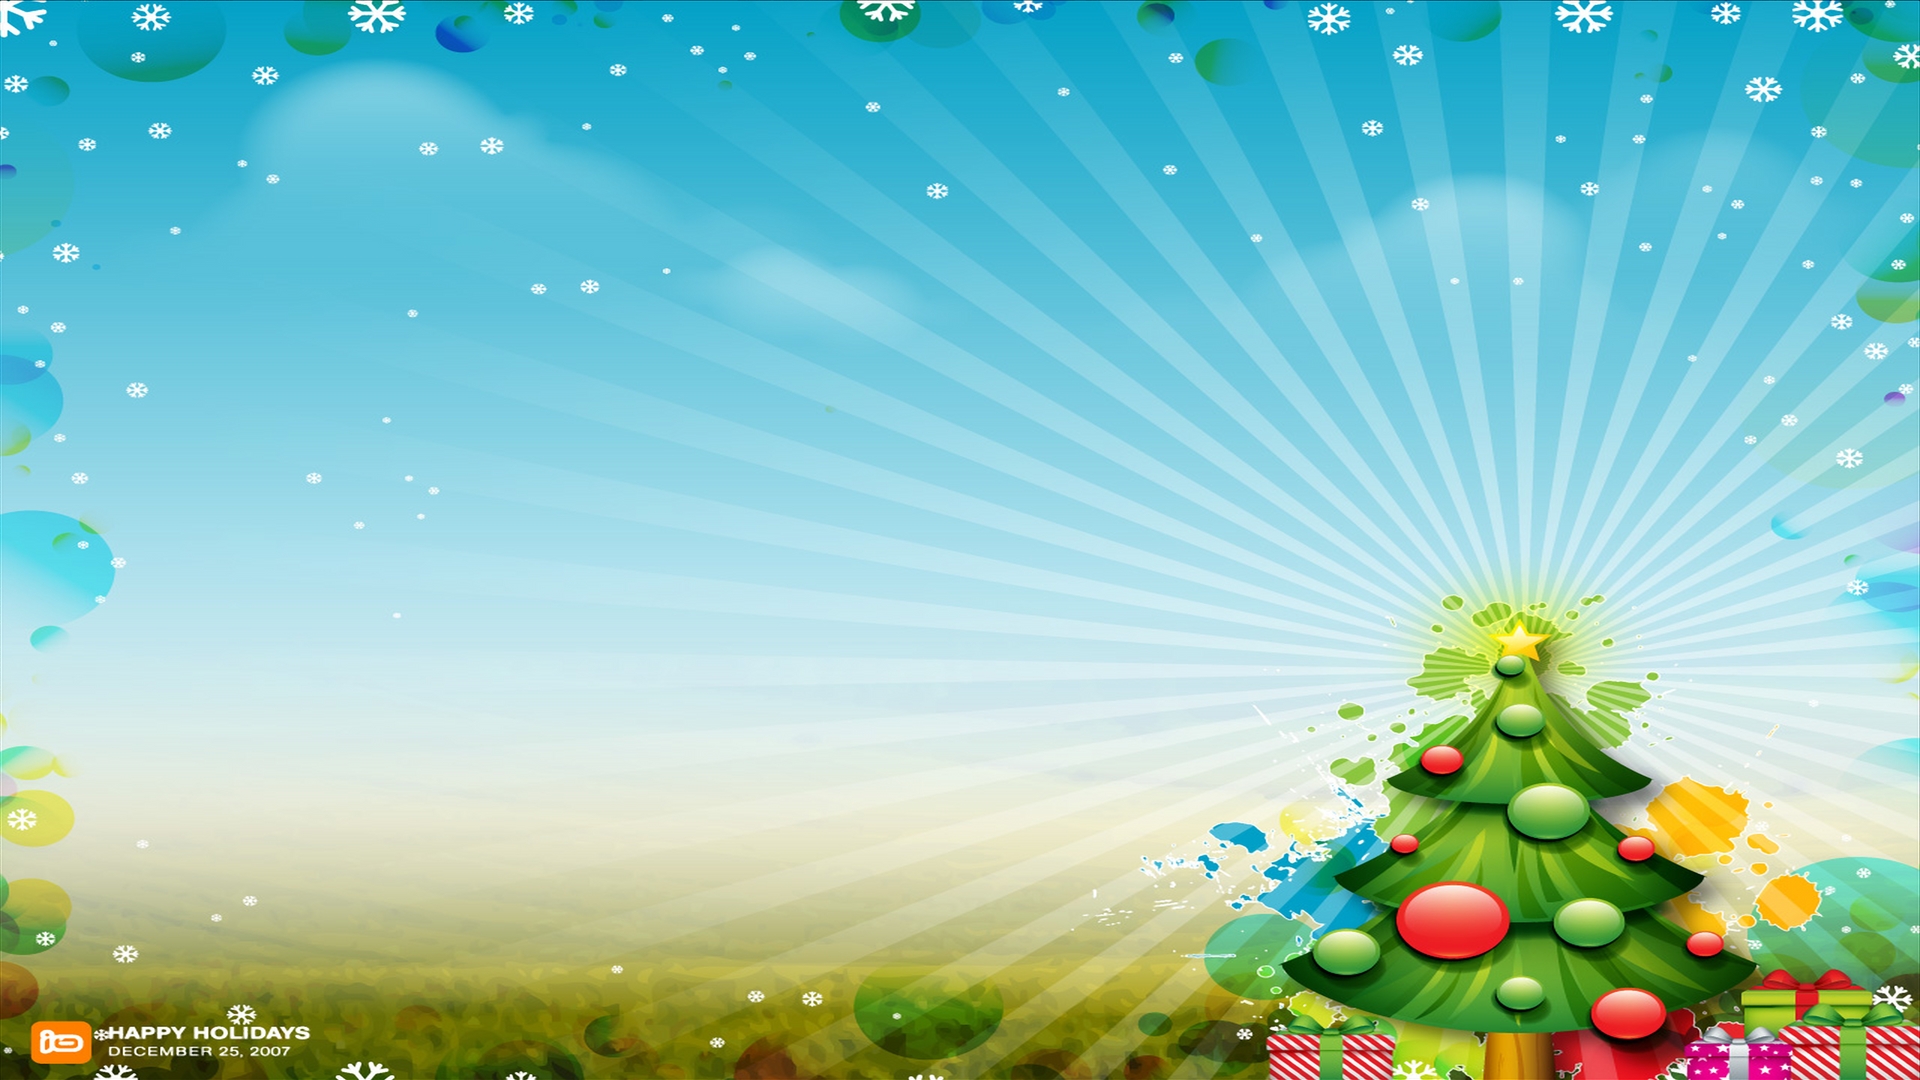 Awesome Christmas Pixels Full HD Wallpaper Collection